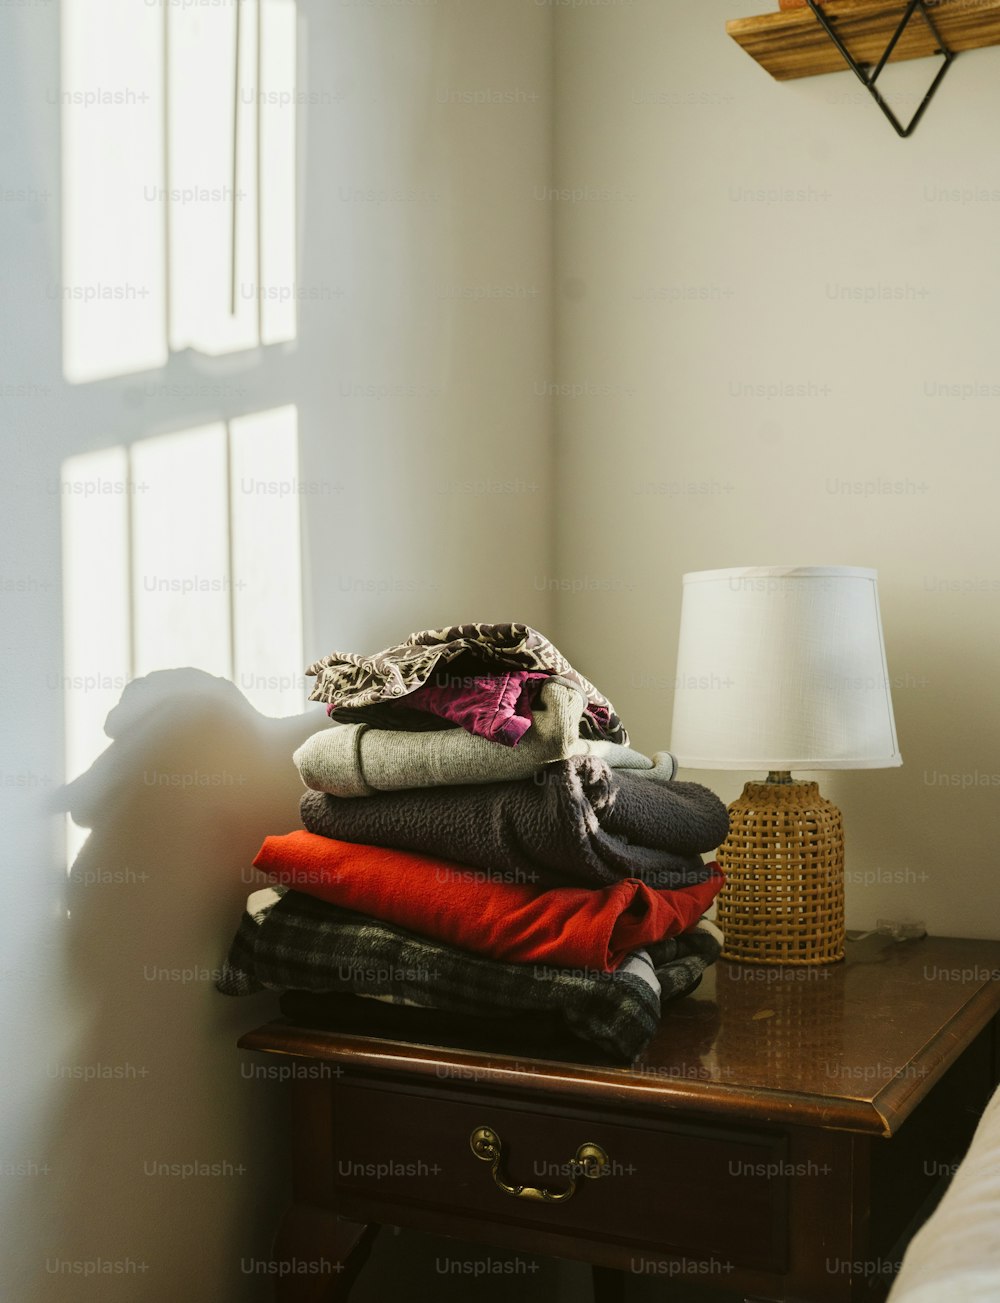 a stack of folded clothes on a table next to a lamp